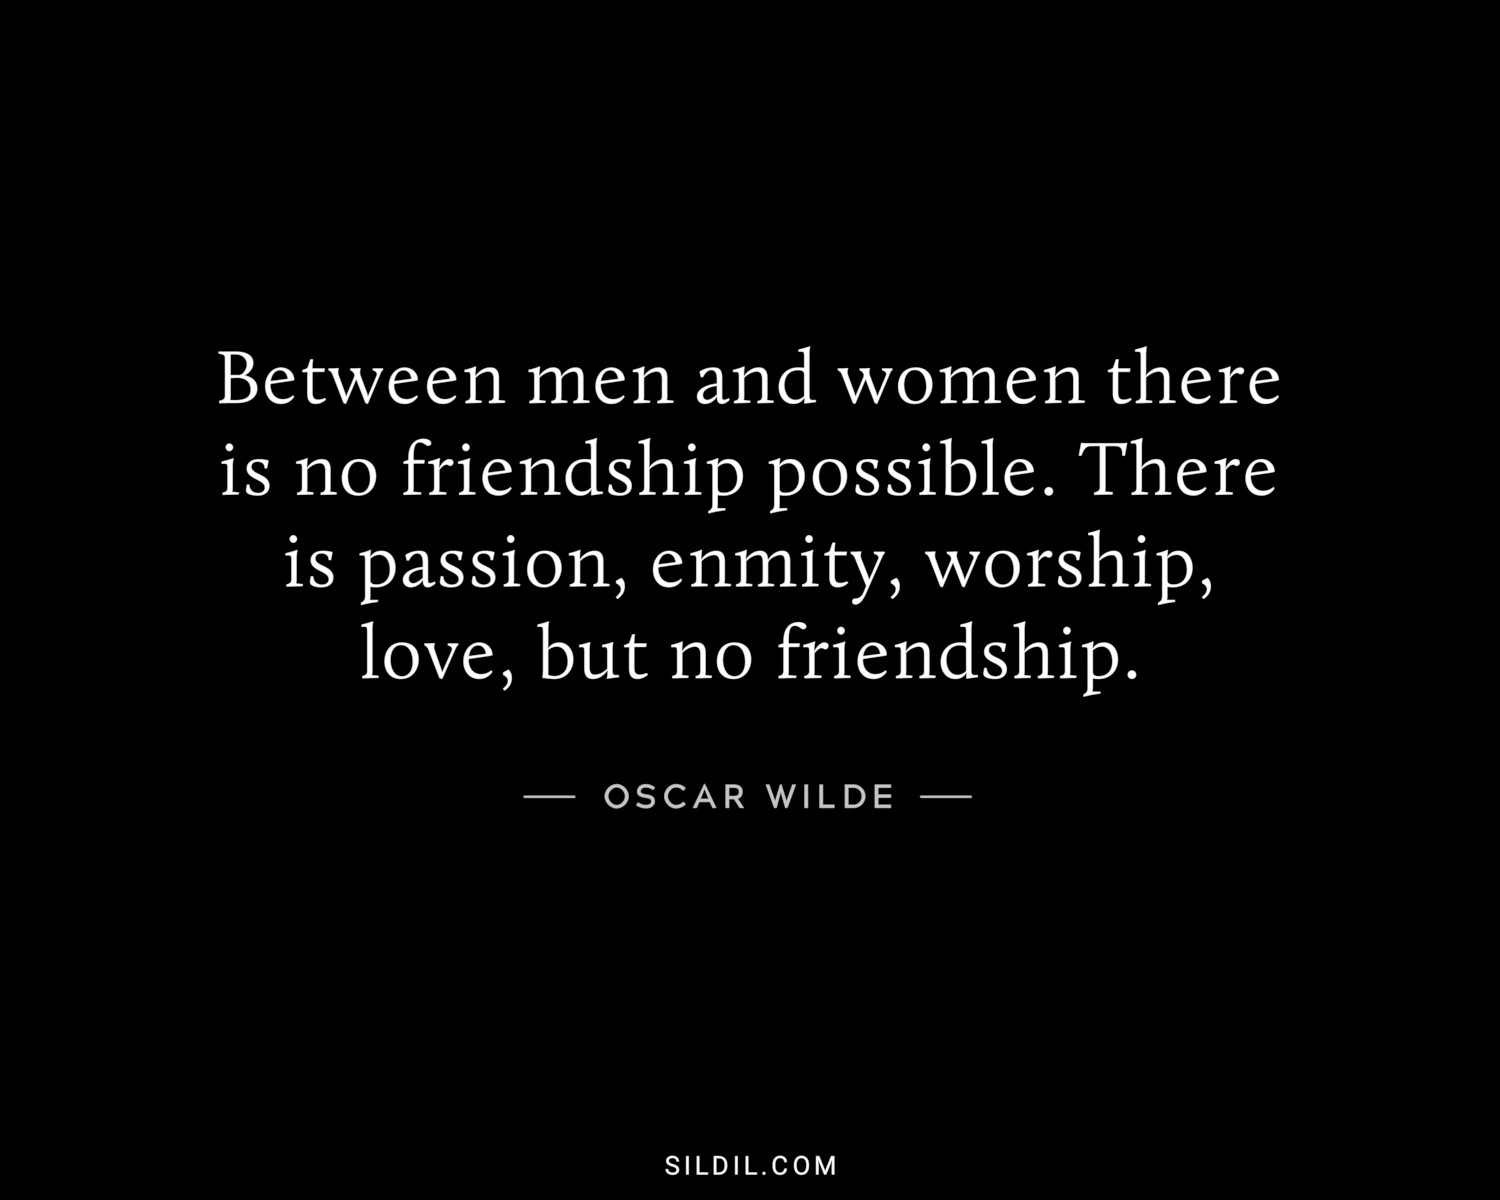 Between men and women there is no friendship possible. There is passion, enmity, worship, love, but no friendship.